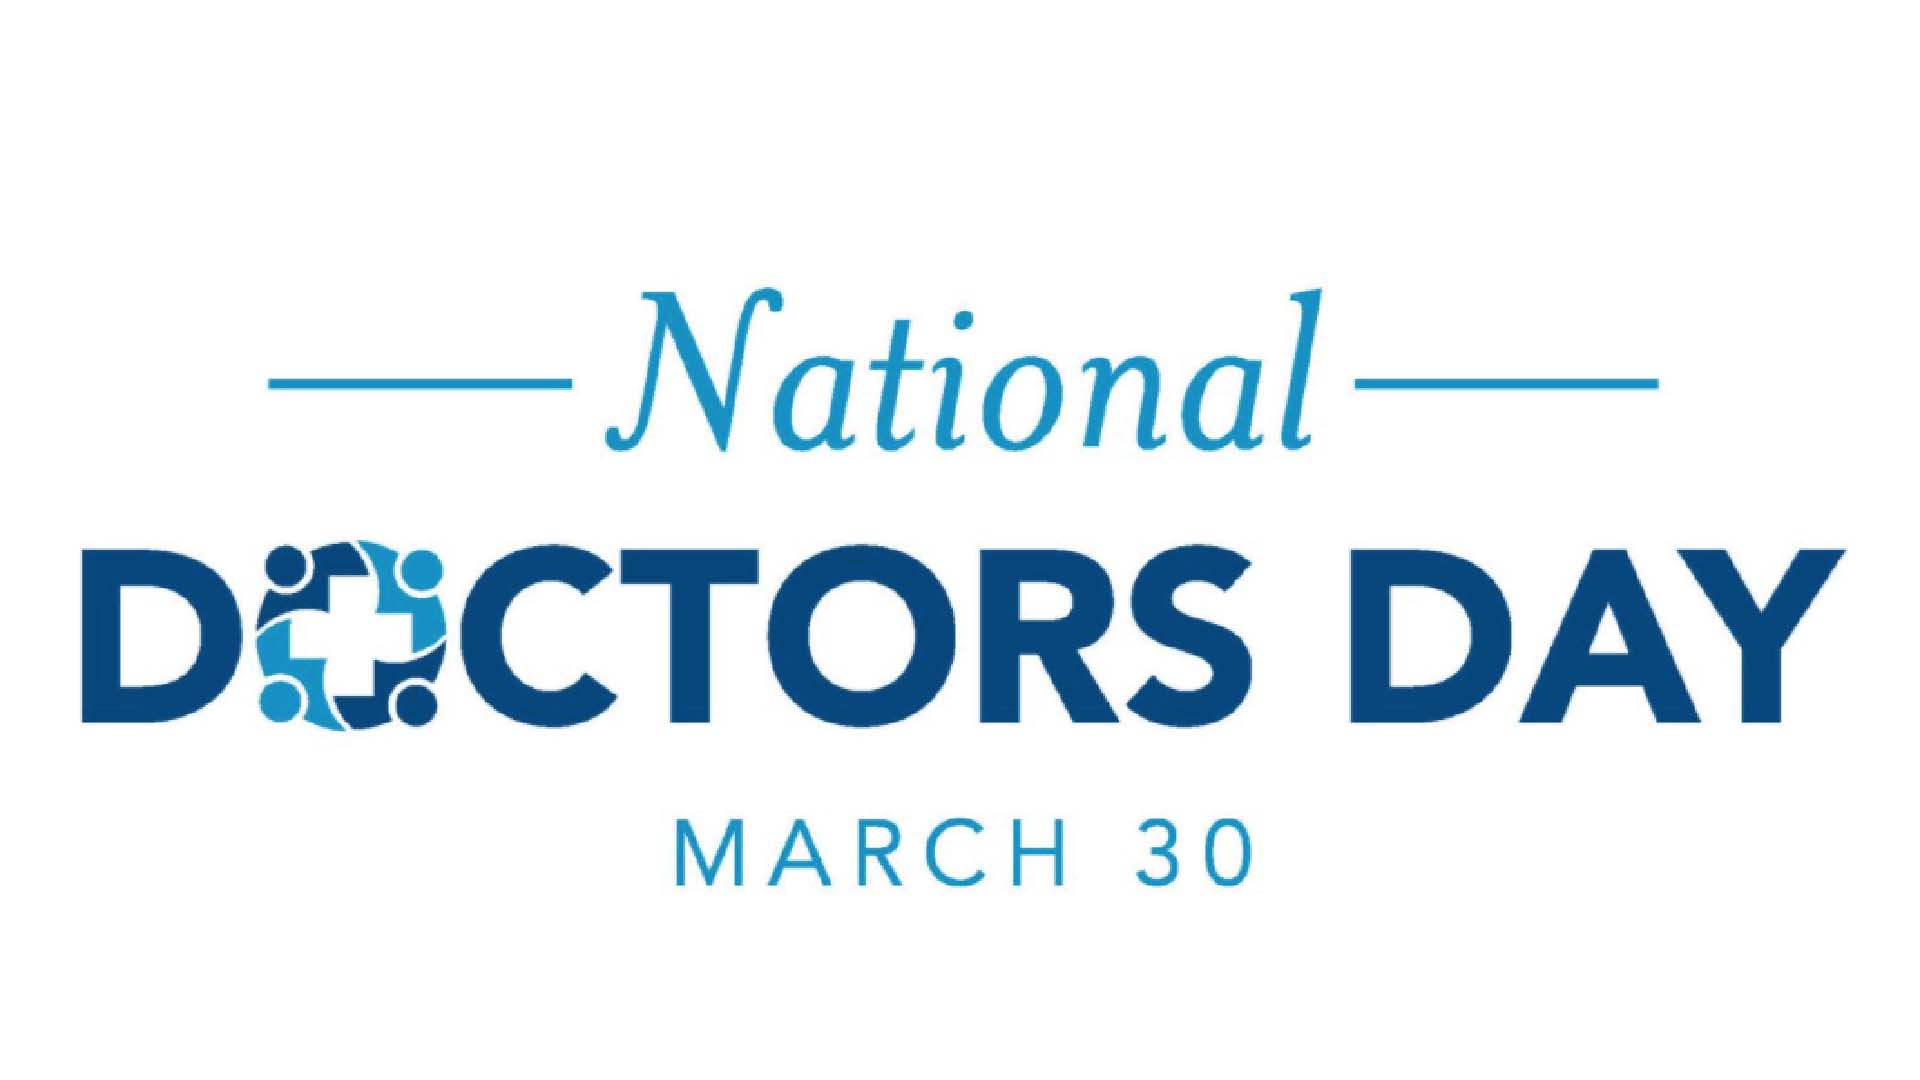 White Background with light blue and navy font displaying National Doctors Day March 30th